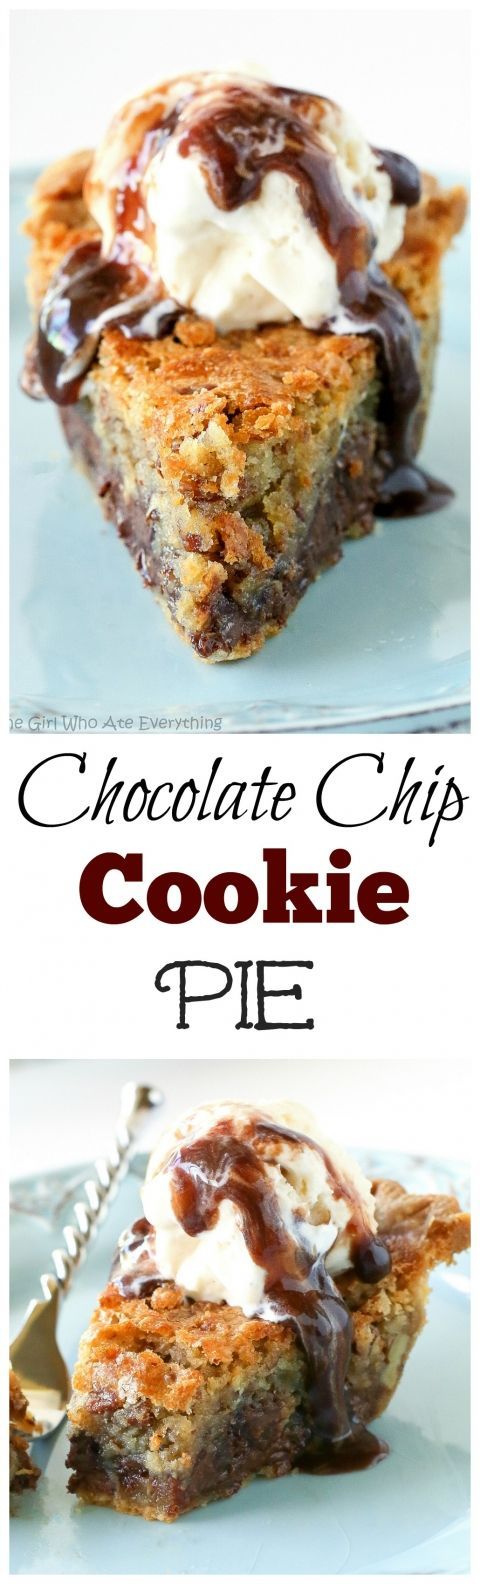 Chocolate Chip Pie – one of our favorite pies ever. Basically a chocolate chip coo